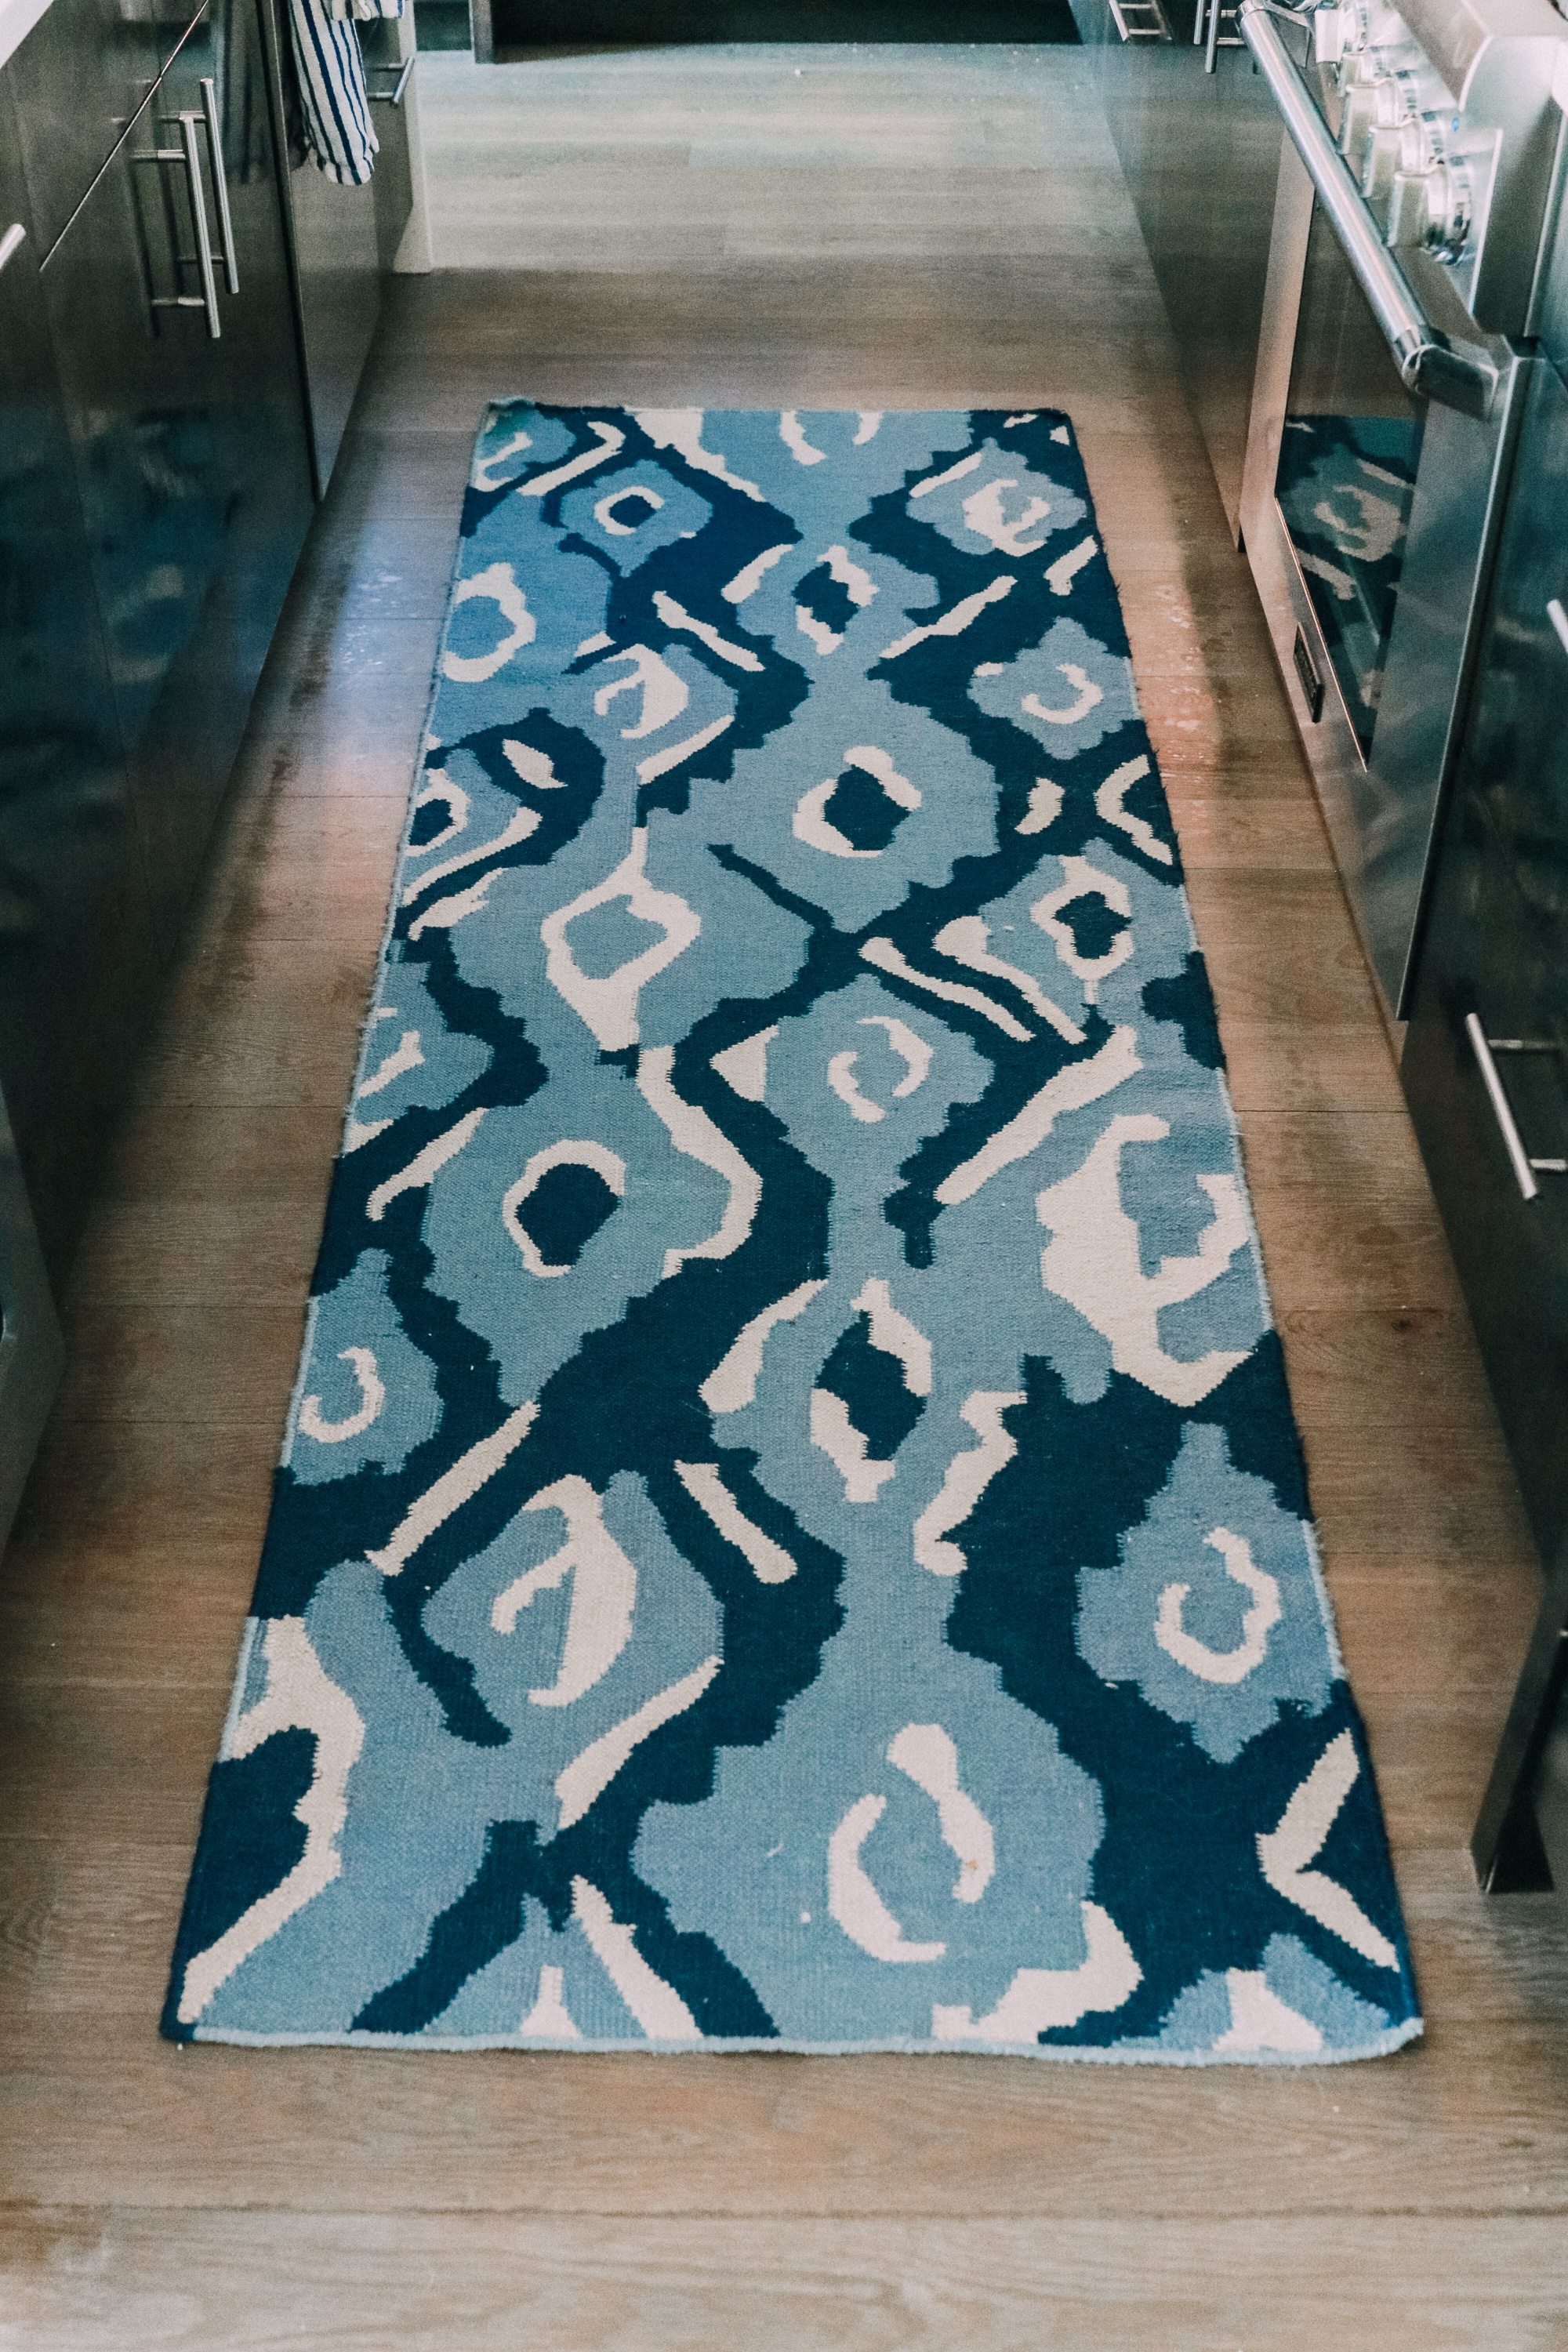 How To Pick A Kitchen Rug, Fashion blogger Erin Busbee of BusbeeStyle.com sharing how to pick the perfect kitchen rug for your space, plus her favorite kitchen runners and where to buy the best rugs. Sharing her blue abstract kitchen rug in her home in Telluride, Colorado